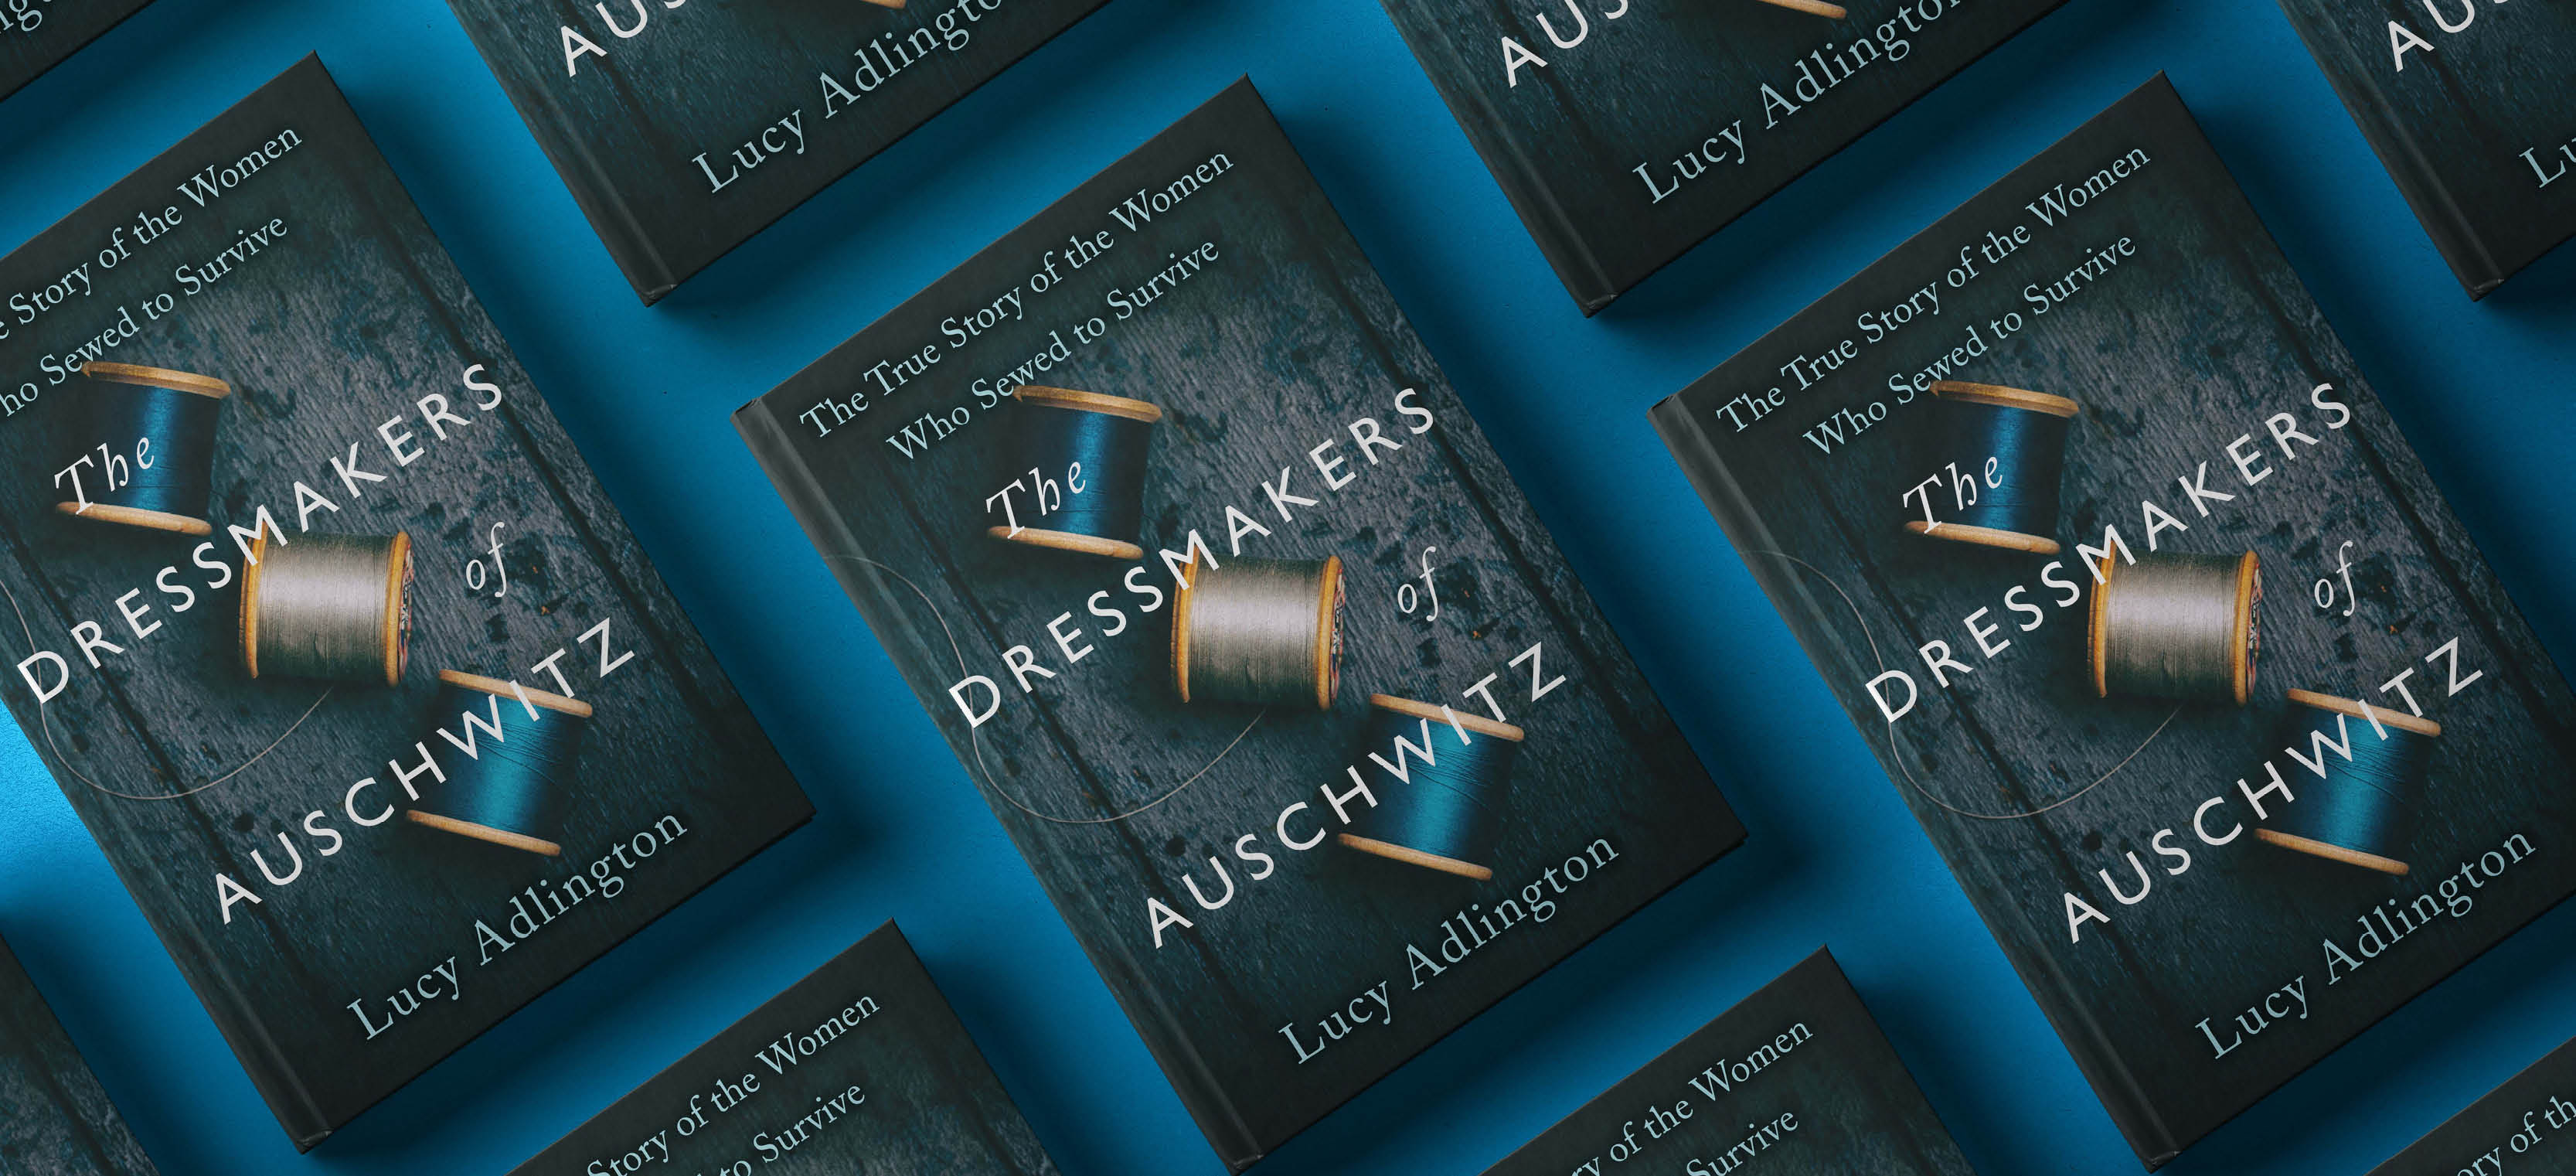 The Dressmakers of Auschwitz with Lucy Adlington